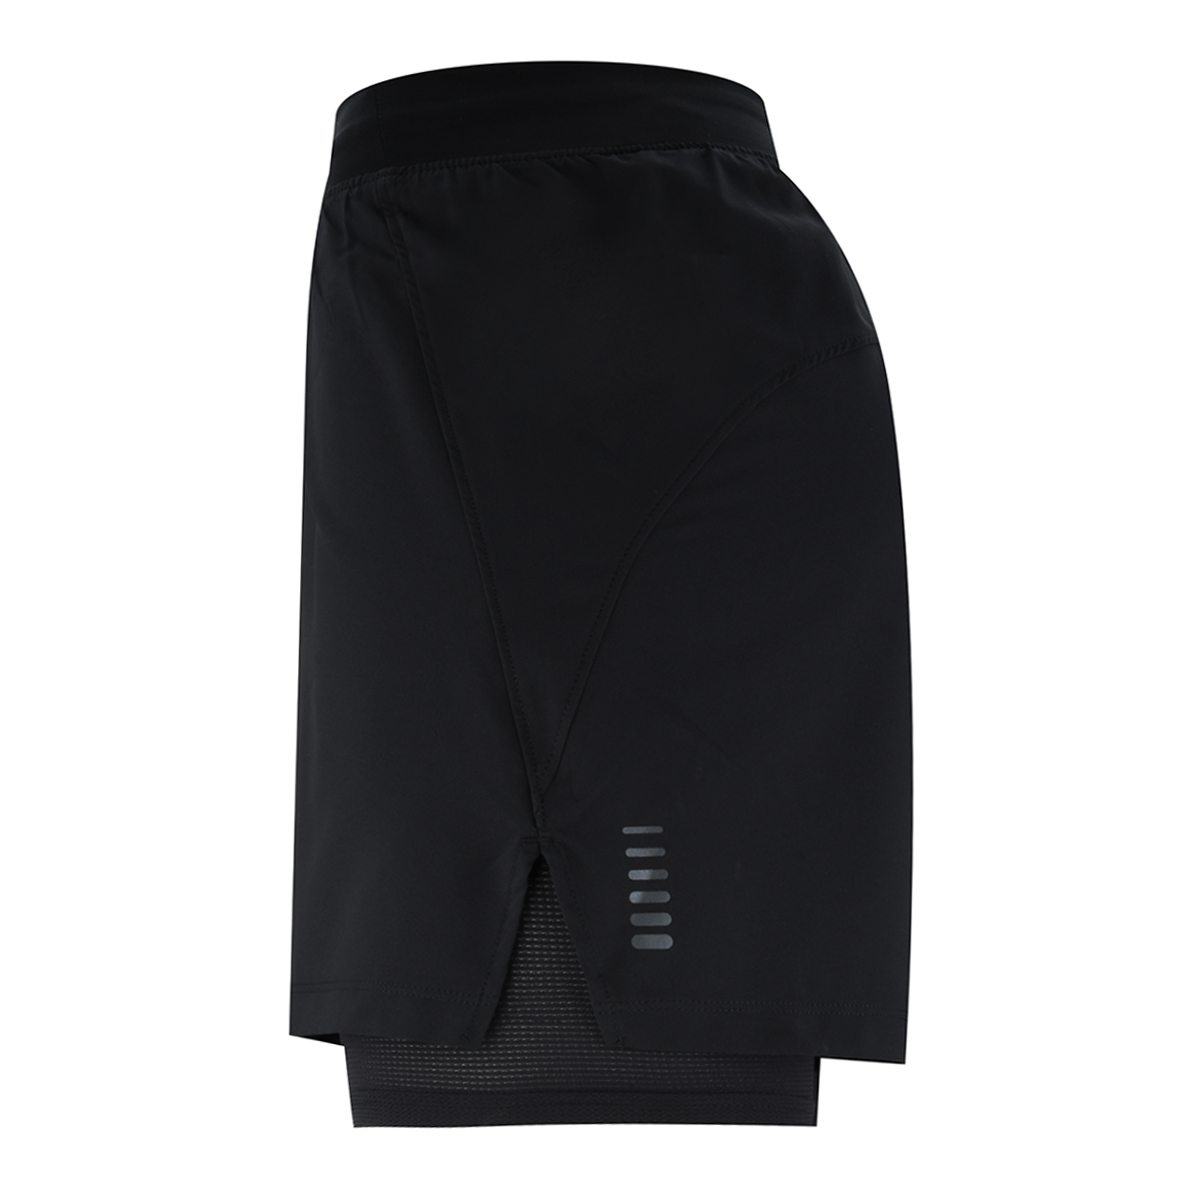 Short Under Armour Iso-chill 2n1,  image number null